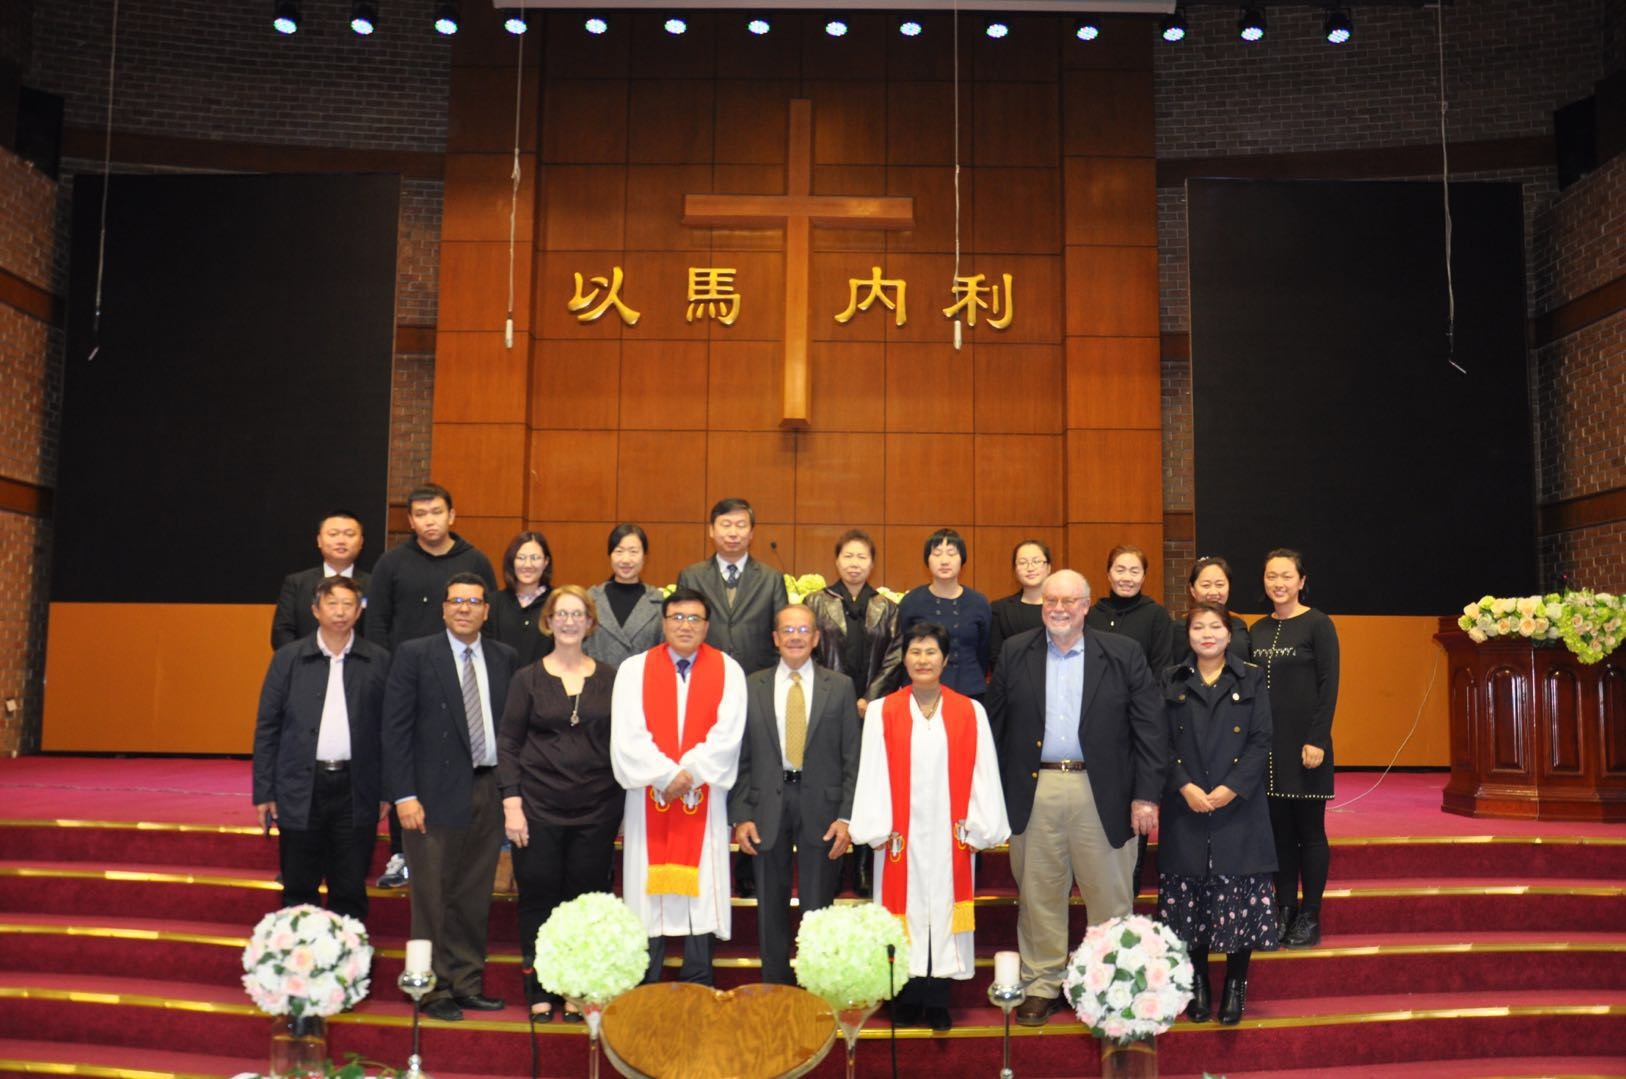  The Outreach Foundation team with brothers and sisters at Hallelujah Church, Harbin, China 